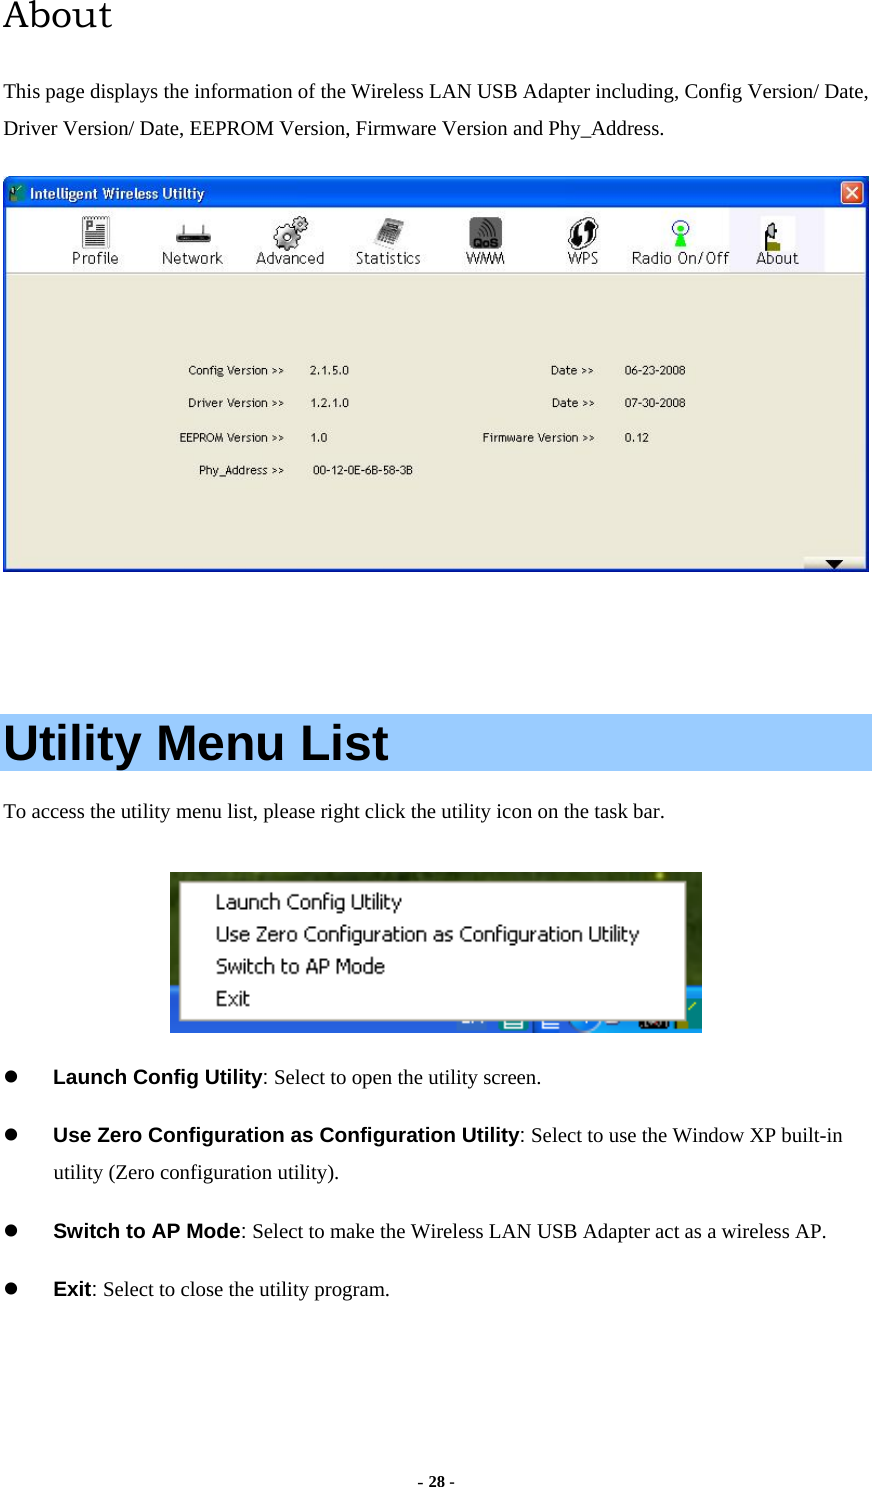  - 28 -  About This page displays the information of the Wireless LAN USB Adapter including, Config Version/ Date, Driver Version/ Date, EEPROM Version, Firmware Version and Phy_Address.     Utility Menu List To access the utility menu list, please right click the utility icon on the task bar.    Launch Config Utility: Select to open the utility screen.   Use Zero Configuration as Configuration Utility: Select to use the Window XP built-in utility (Zero configuration utility).   Switch to AP Mode: Select to make the Wireless LAN USB Adapter act as a wireless AP.   Exit: Select to close the utility program.   